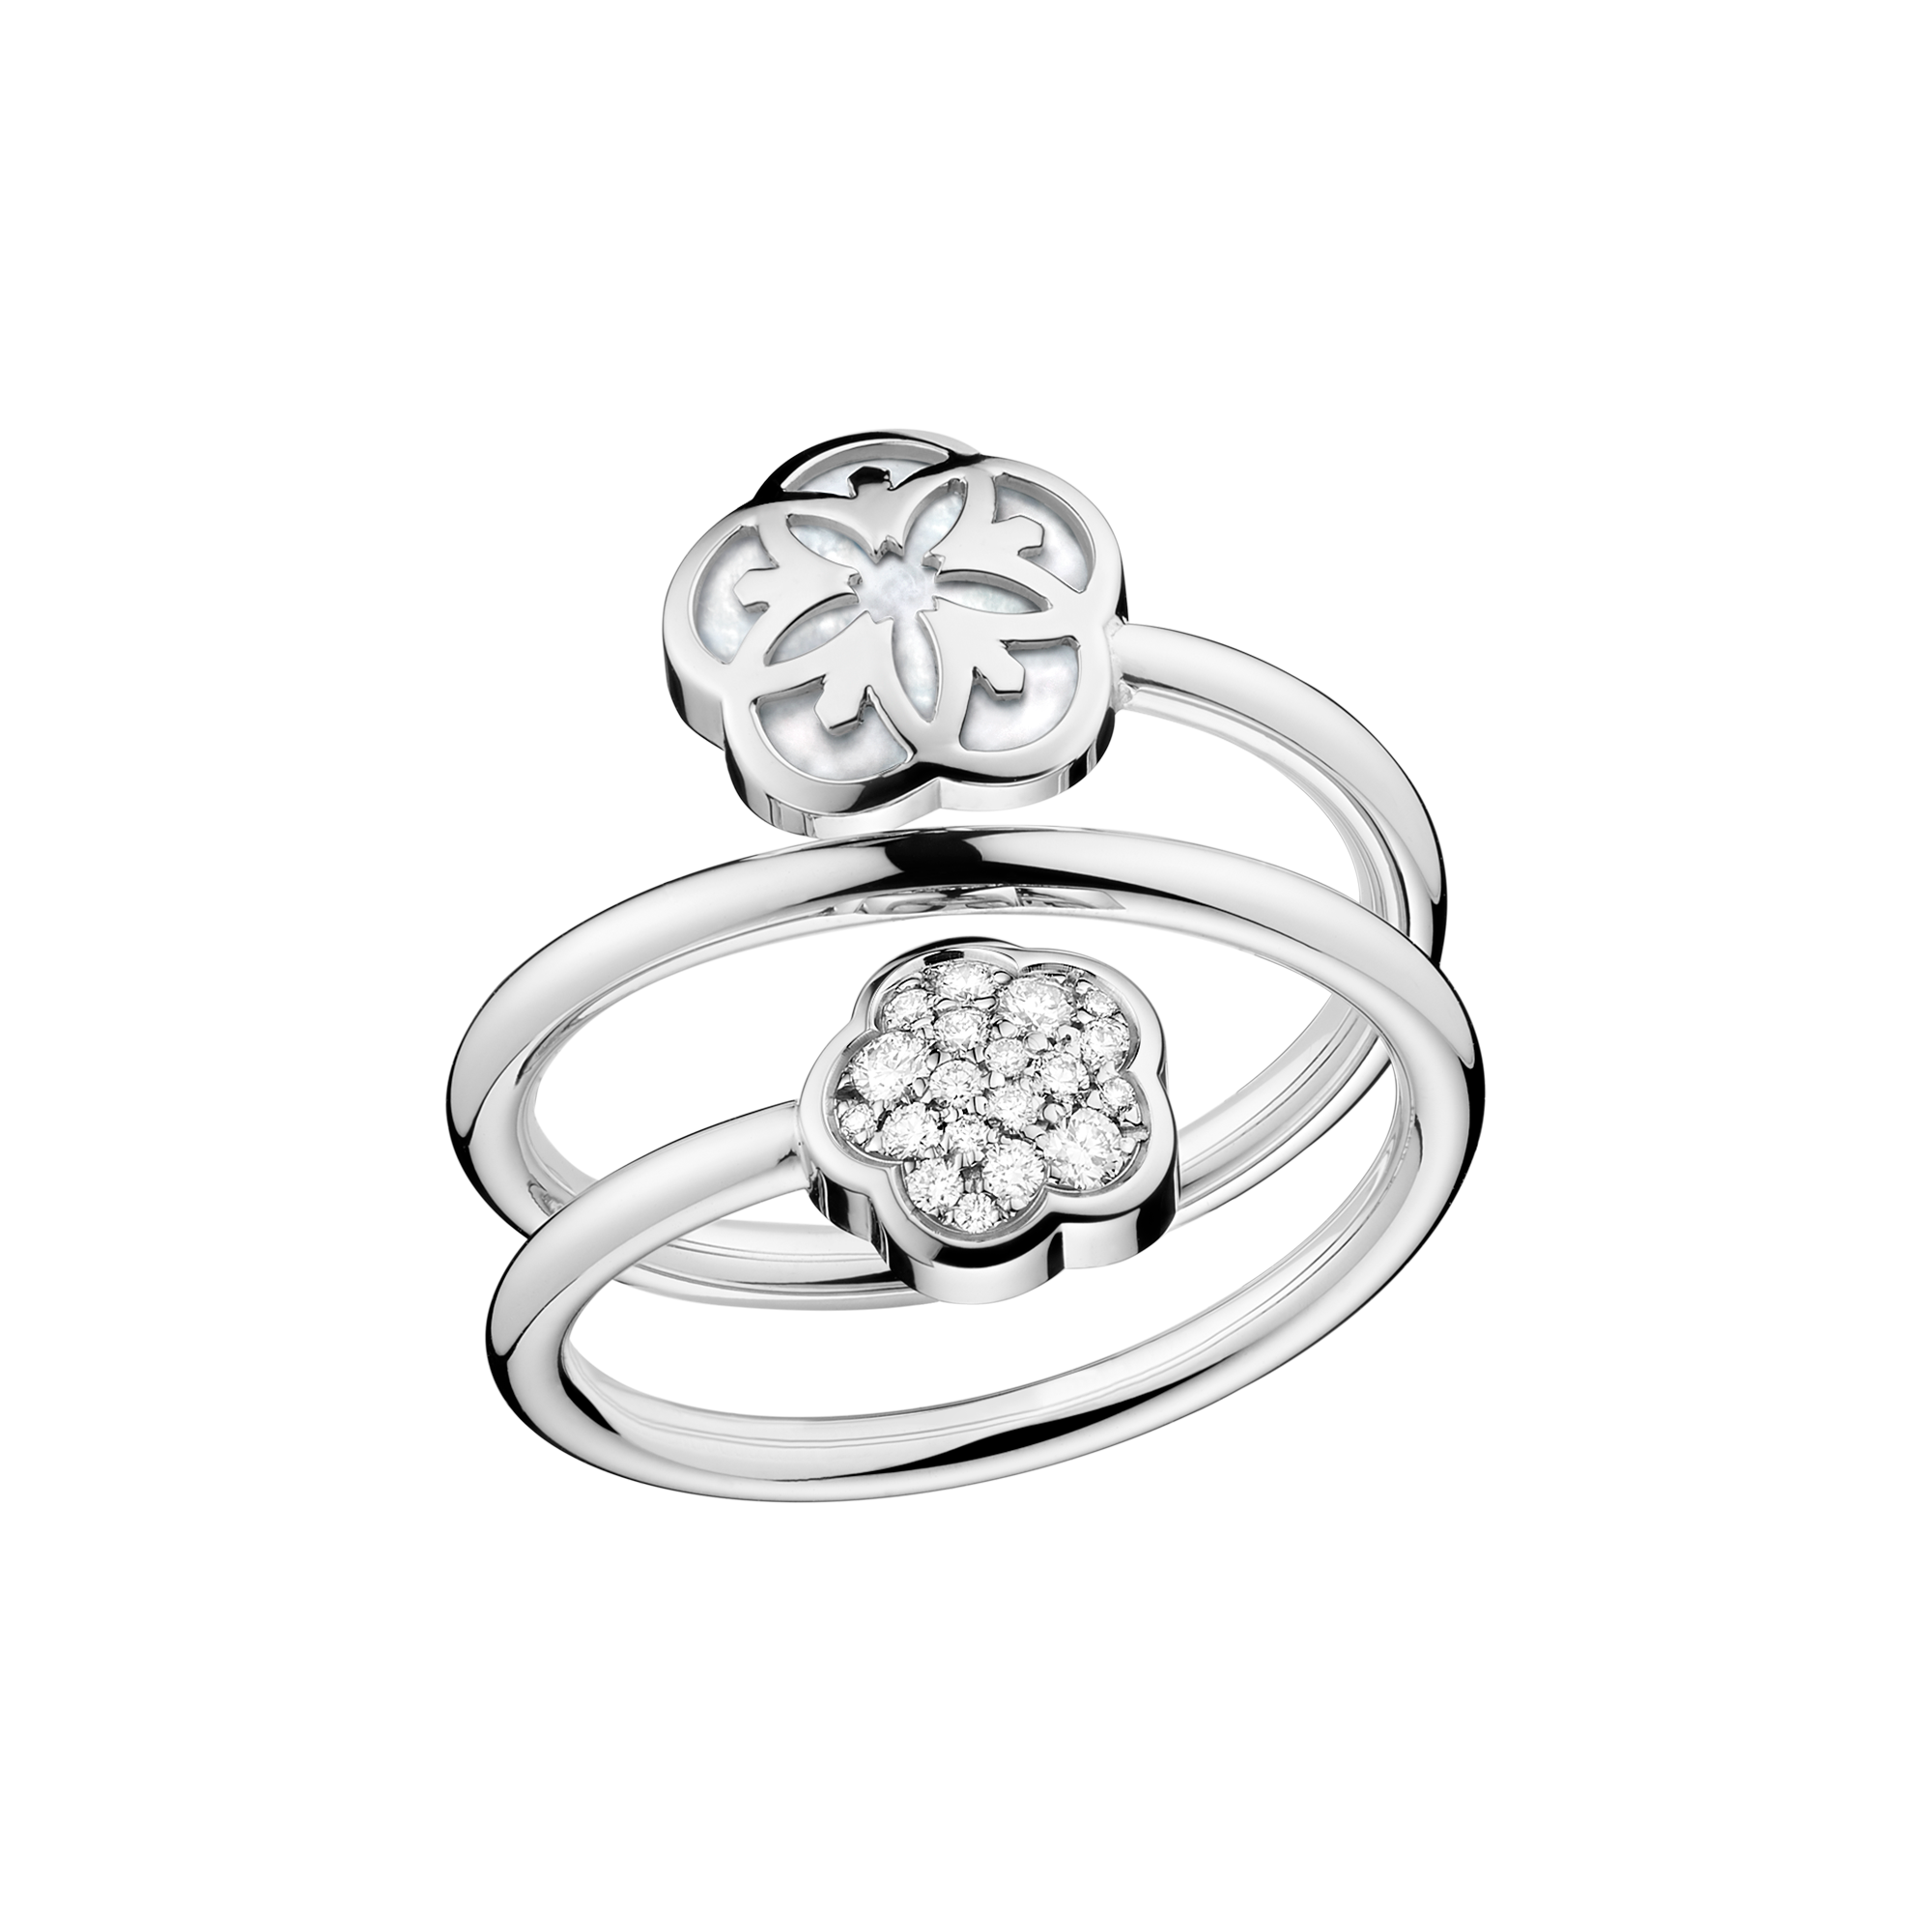 Omega Flower Ring, 18K white gold, Diamonds, Mother-of-pearl cabochon - R603BC06001XX